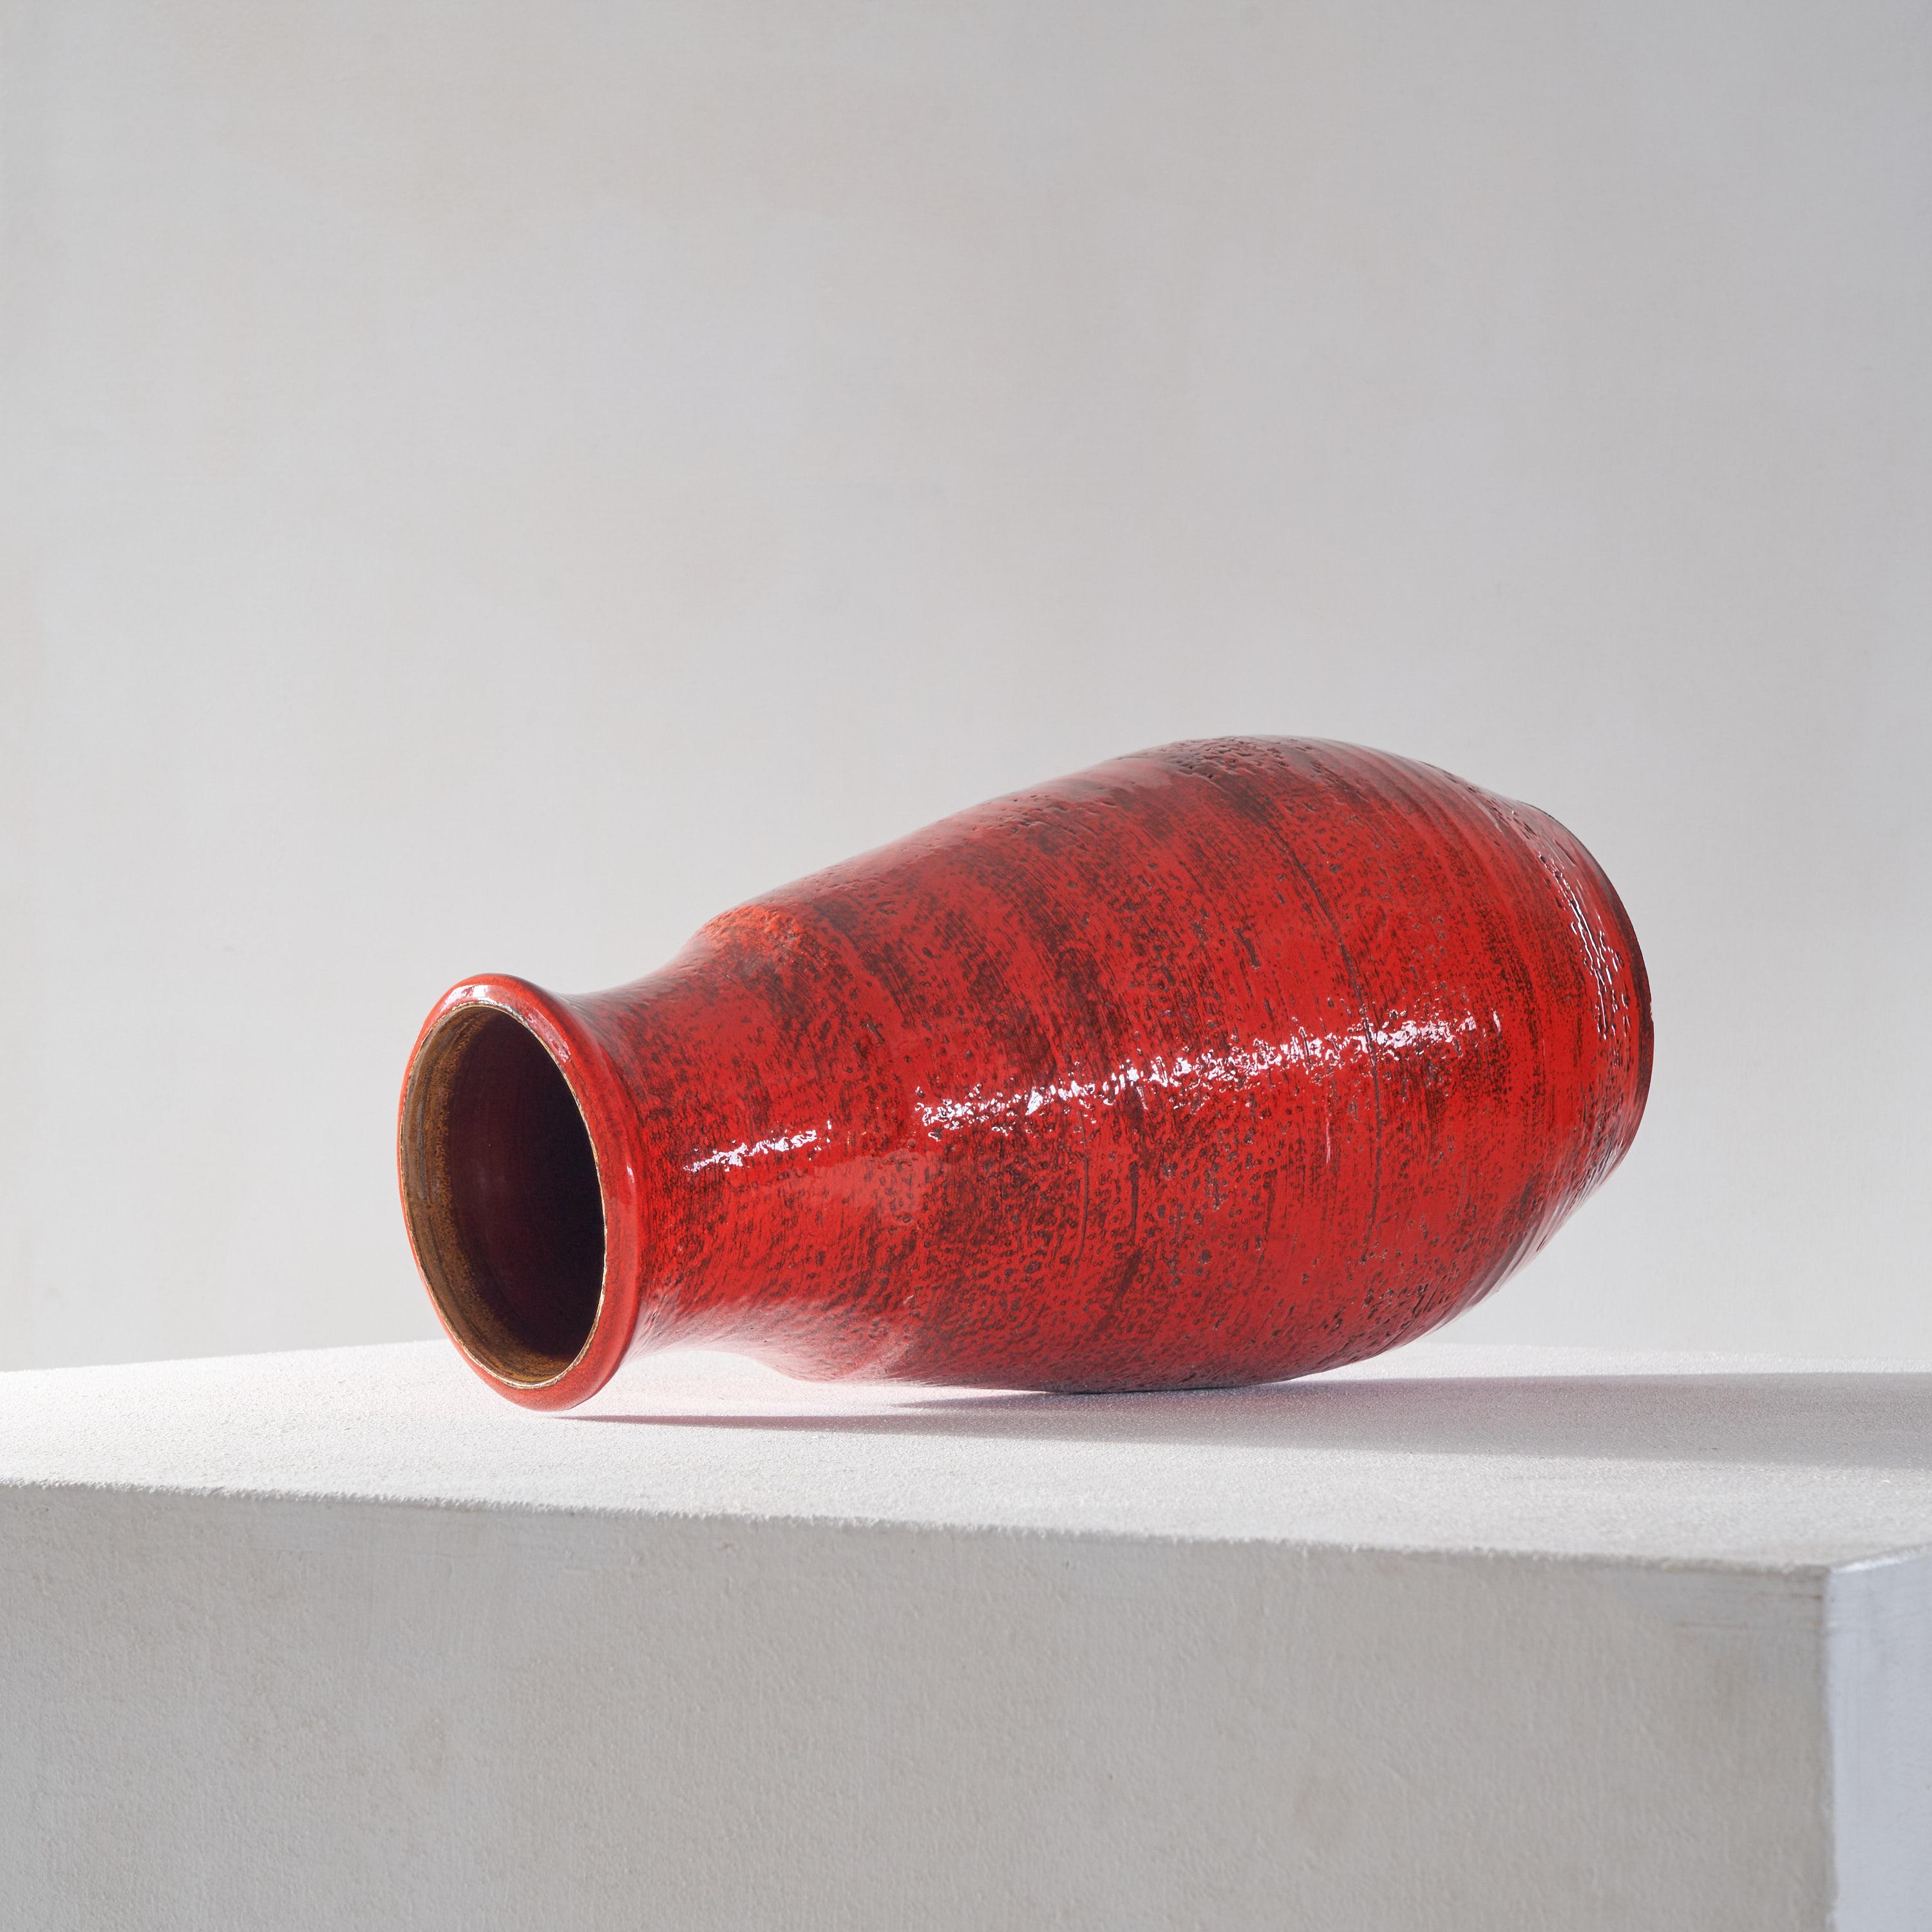 Very large mid century studio pottery vase in bright red. Europe, 1960s.

This stunning mid century studio pottery vase is a true masterpiece of ceramic art. Standing at a substantial size (51cm in height), this vase is sure to make a statement in